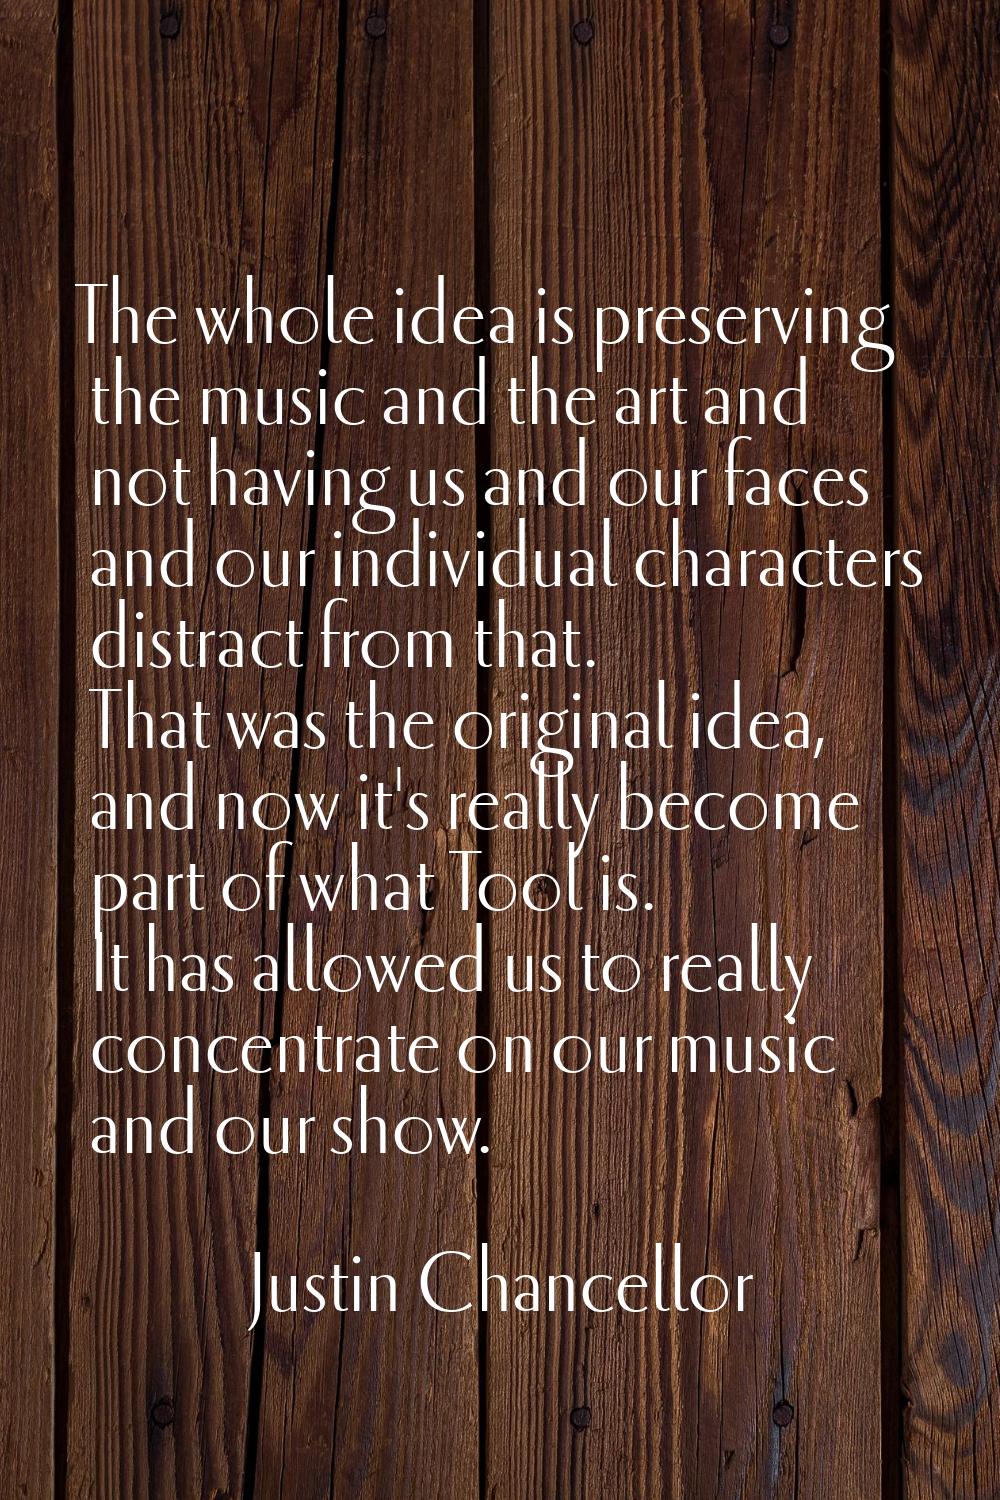 The whole idea is preserving the music and the art and not having us and our faces and our individu